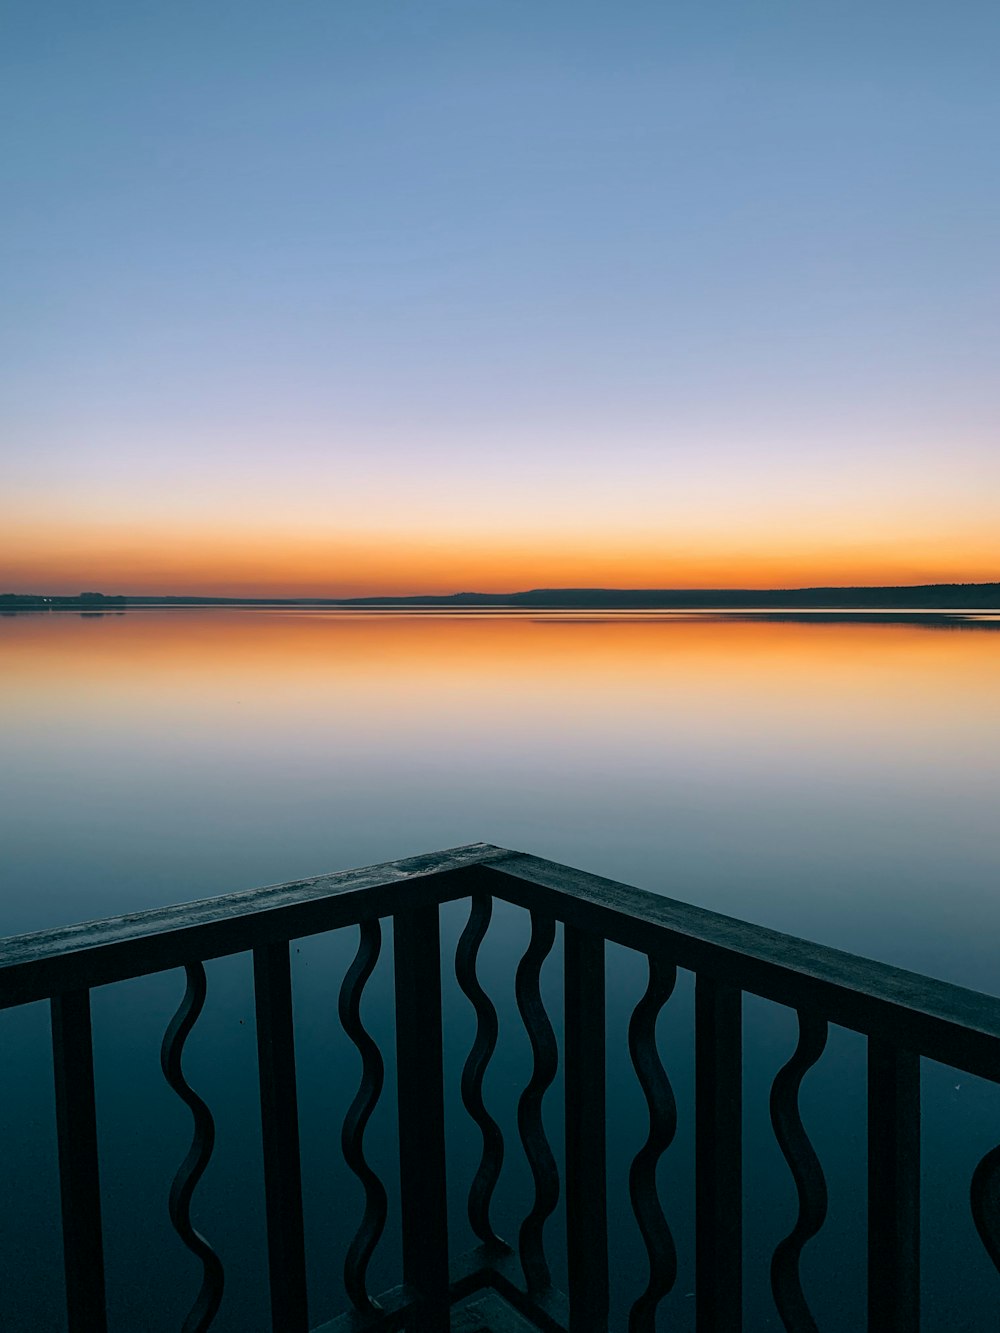 black wooden railings near body of water during sunset